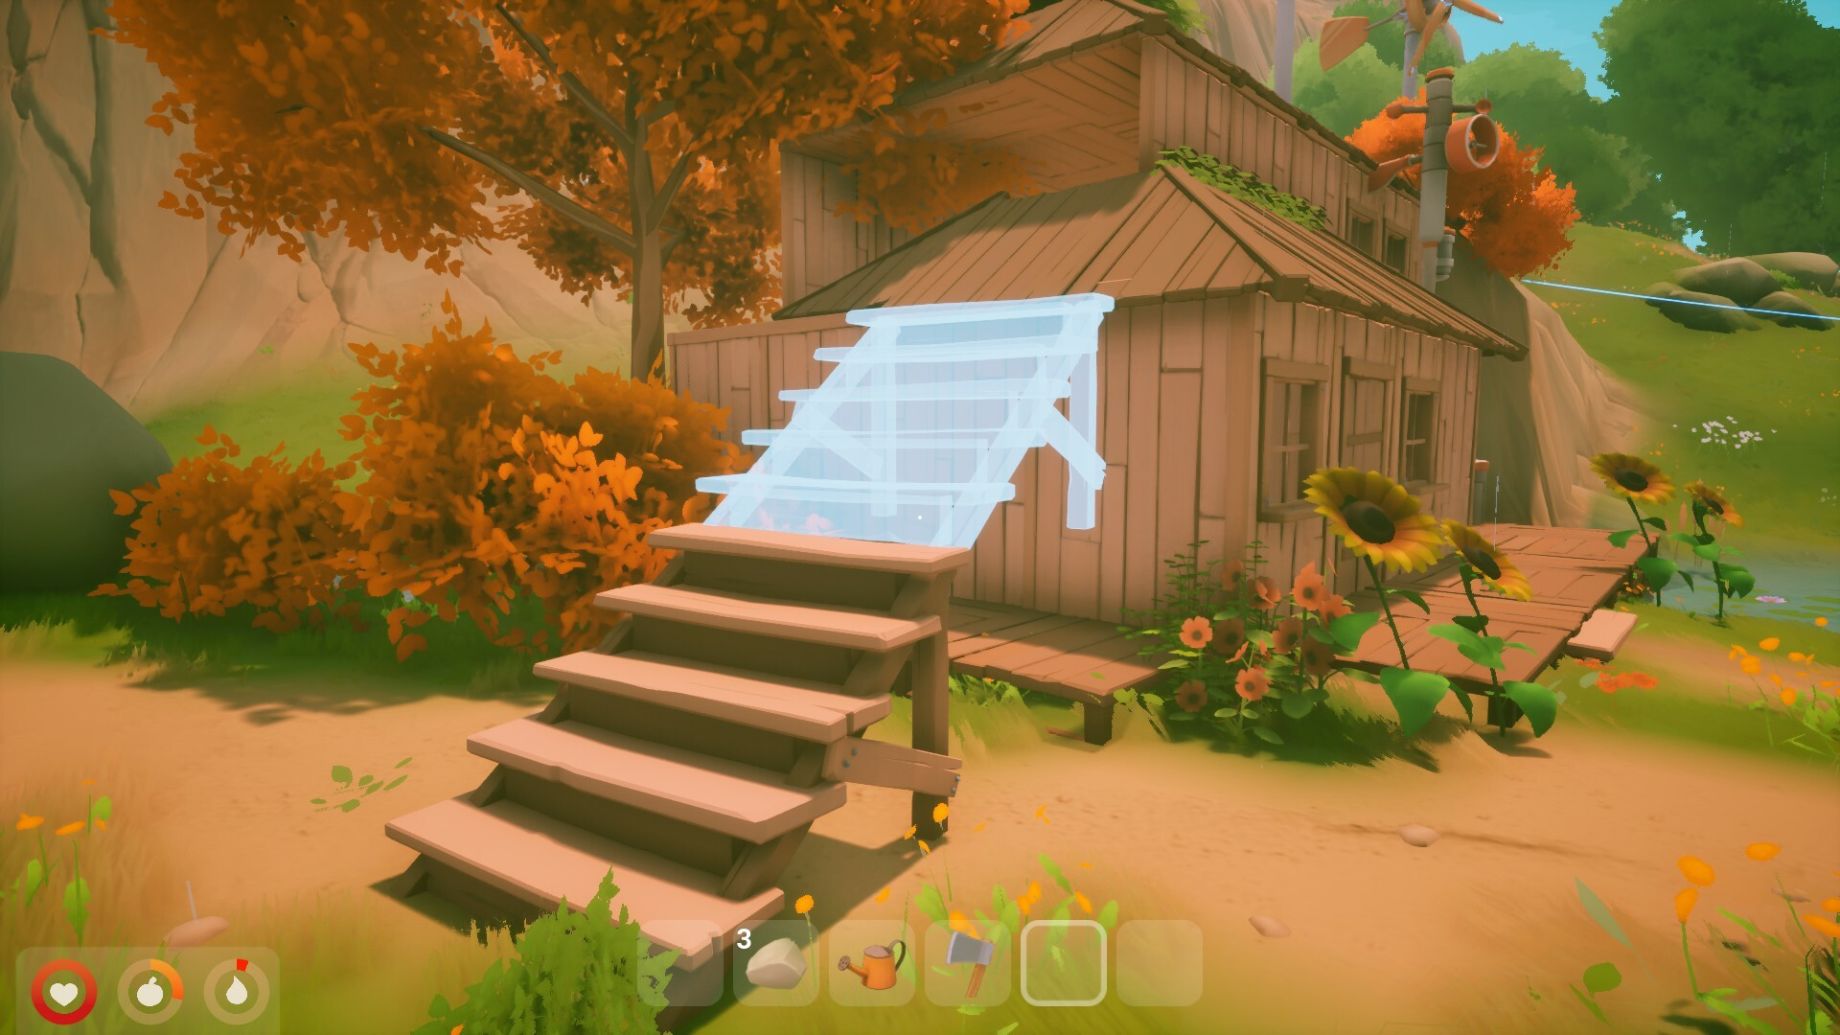 Solarpunk is a survival game set in an advanced world of floating isla